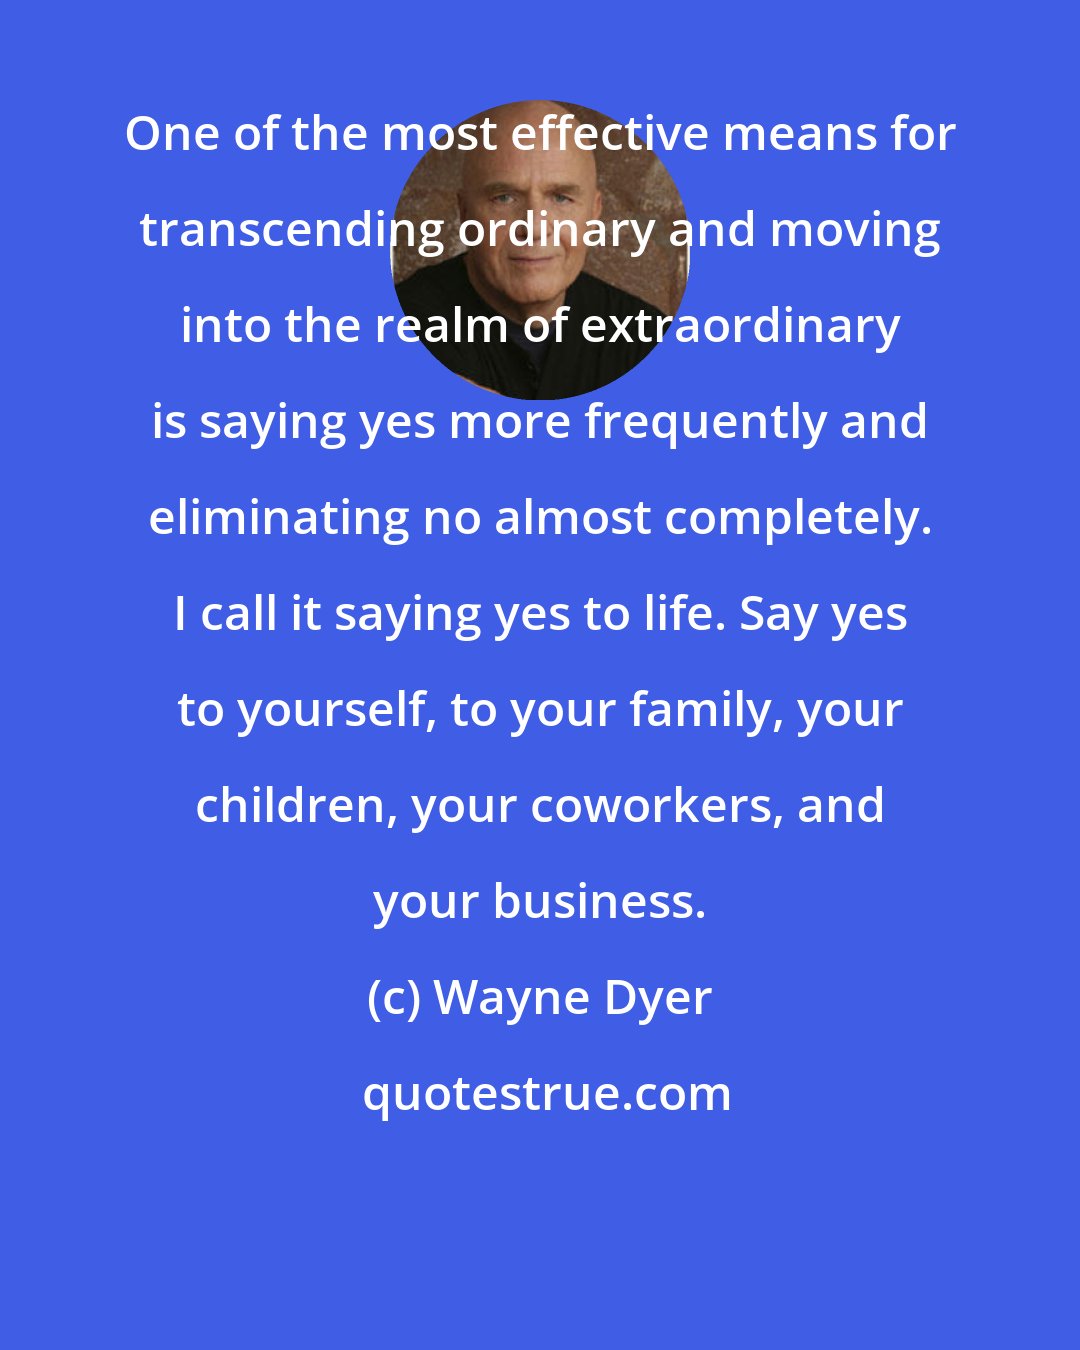 Wayne Dyer: One of the most effective means for transcending ordinary and moving into the realm of extraordinary is saying yes more frequently and eliminating no almost completely. I call it saying yes to life. Say yes to yourself, to your family, your children, your coworkers, and your business.